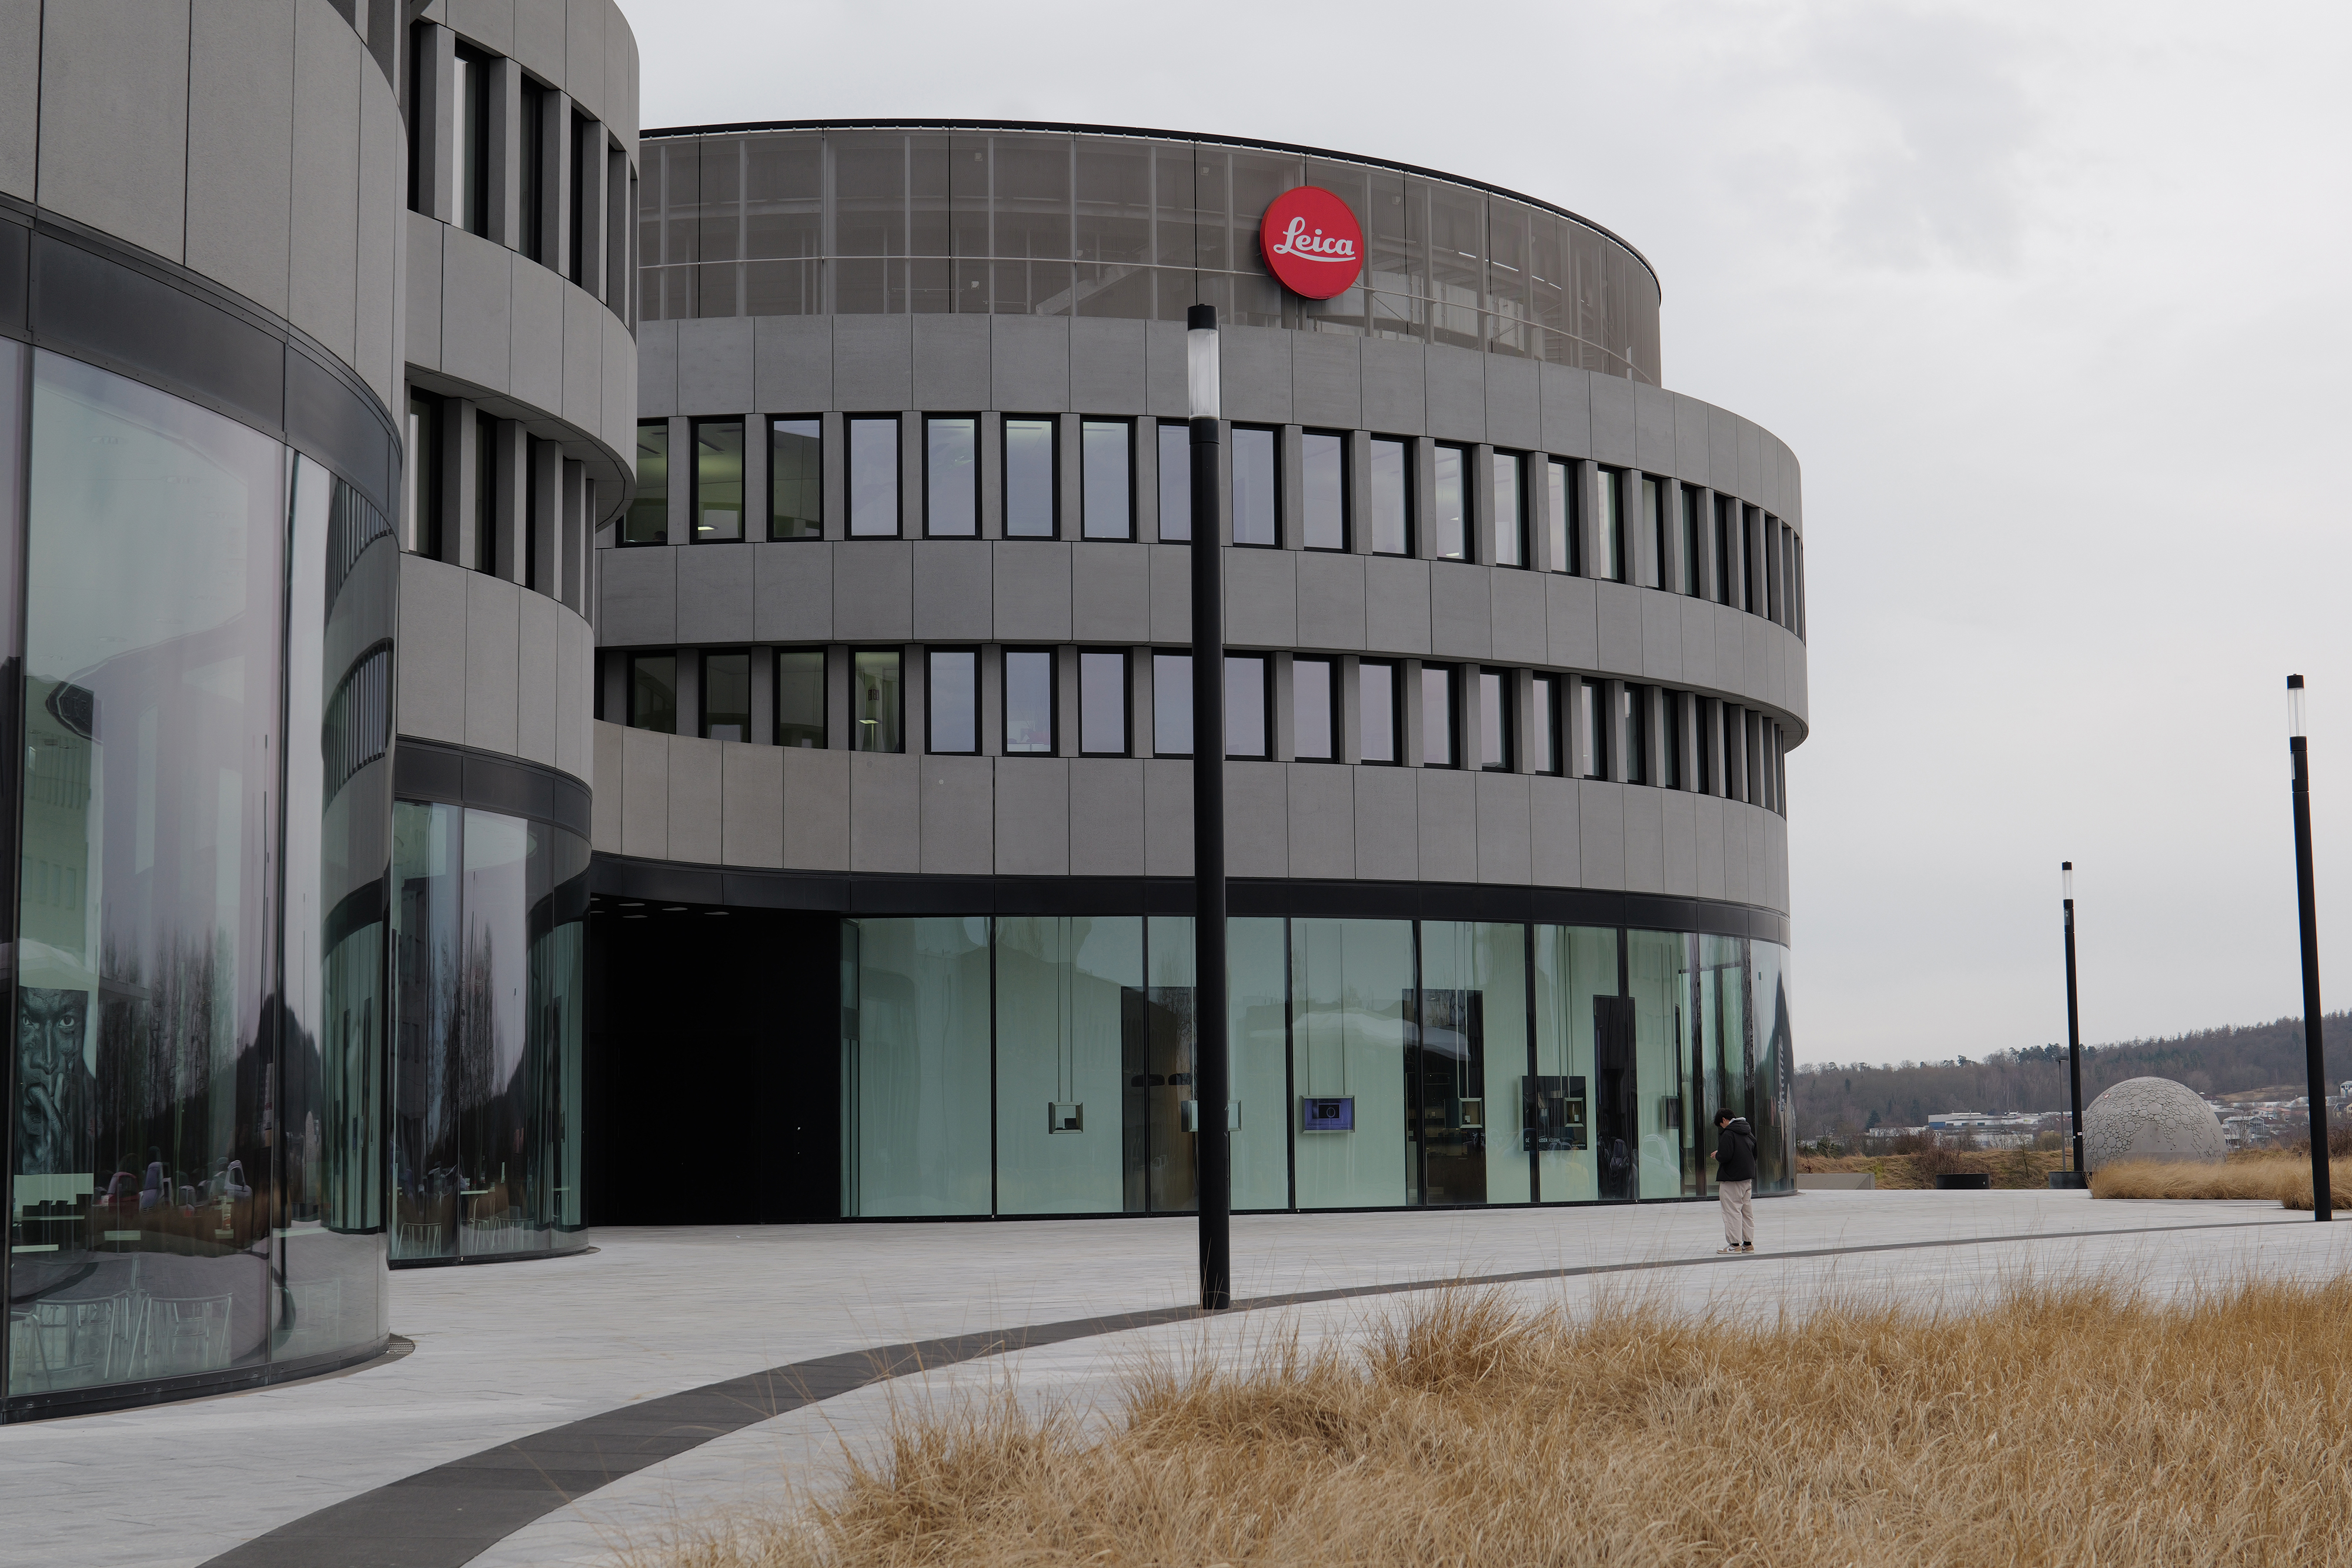 A sample photo of the Leica HQ building taken on the Leica SL3 camera